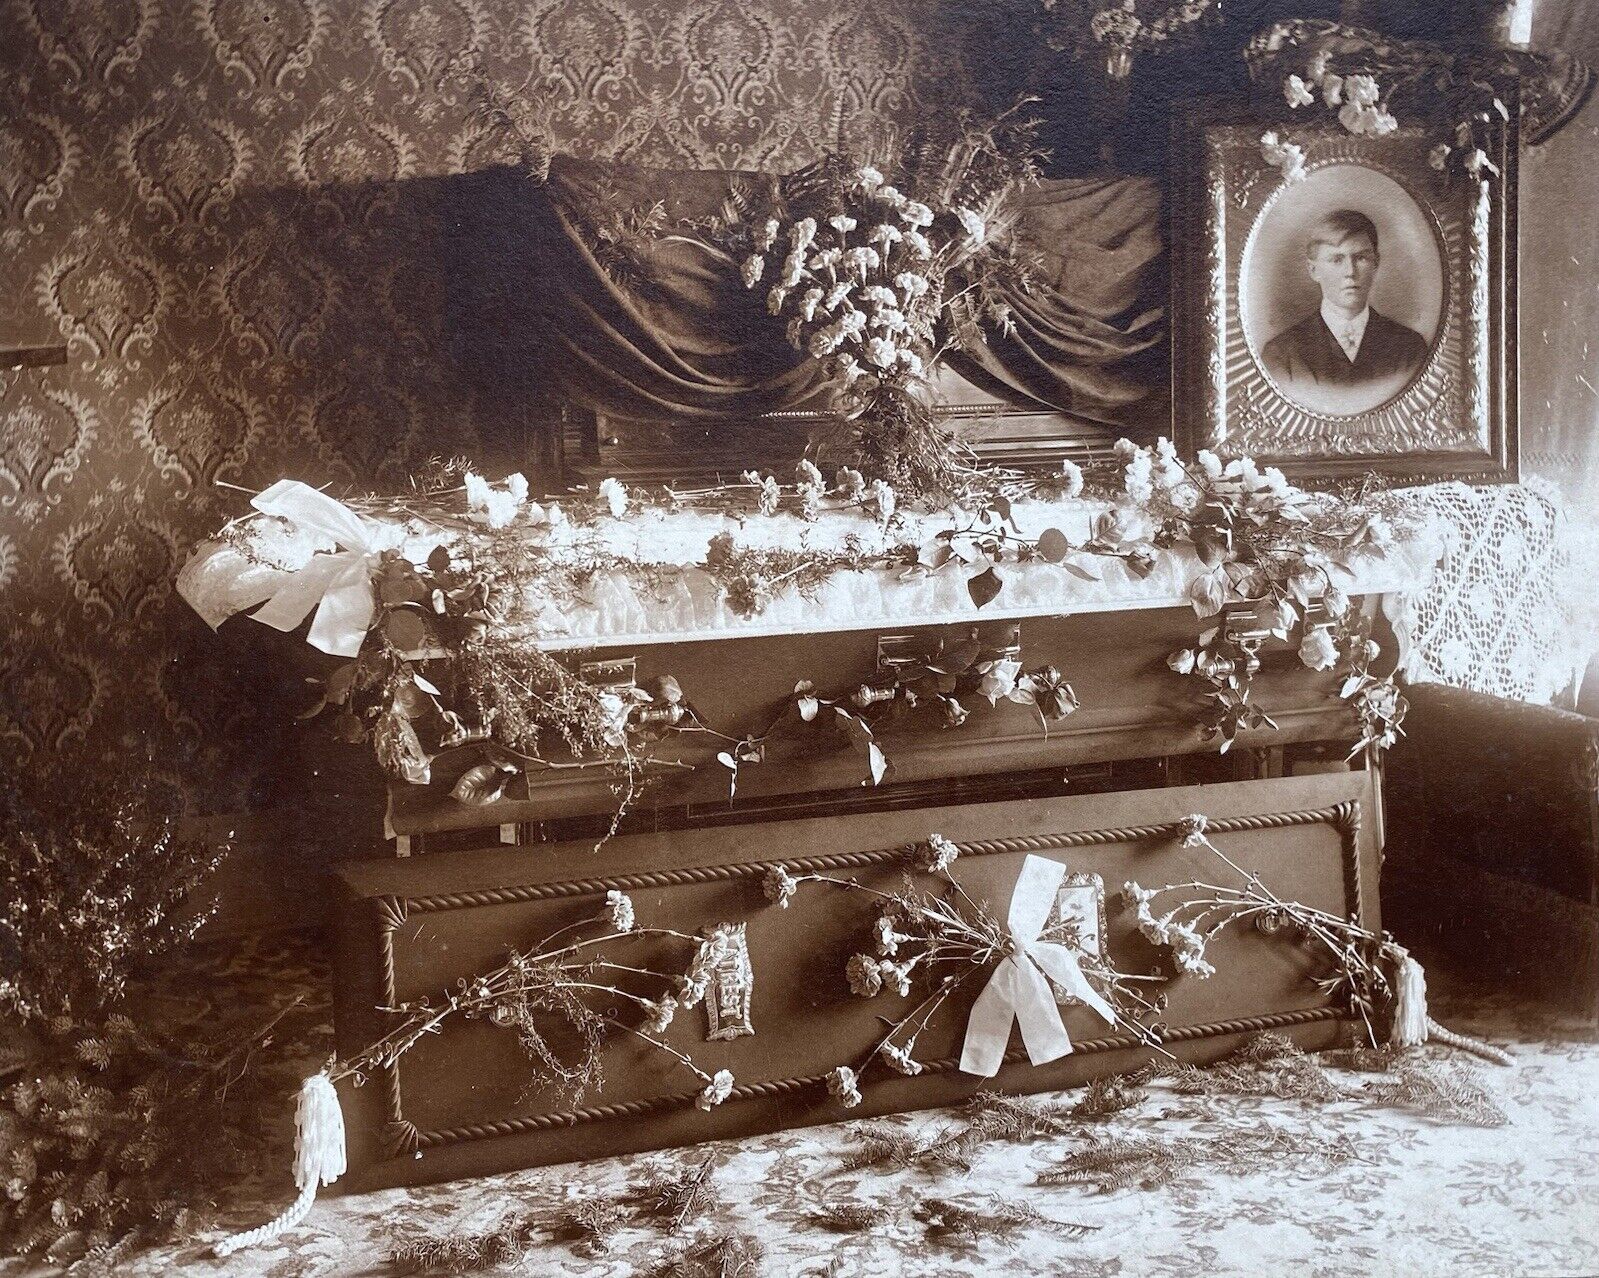 Minnesota 1908 Casket Coffin Funeral for 18 yr old Died Drowning Antique Photo